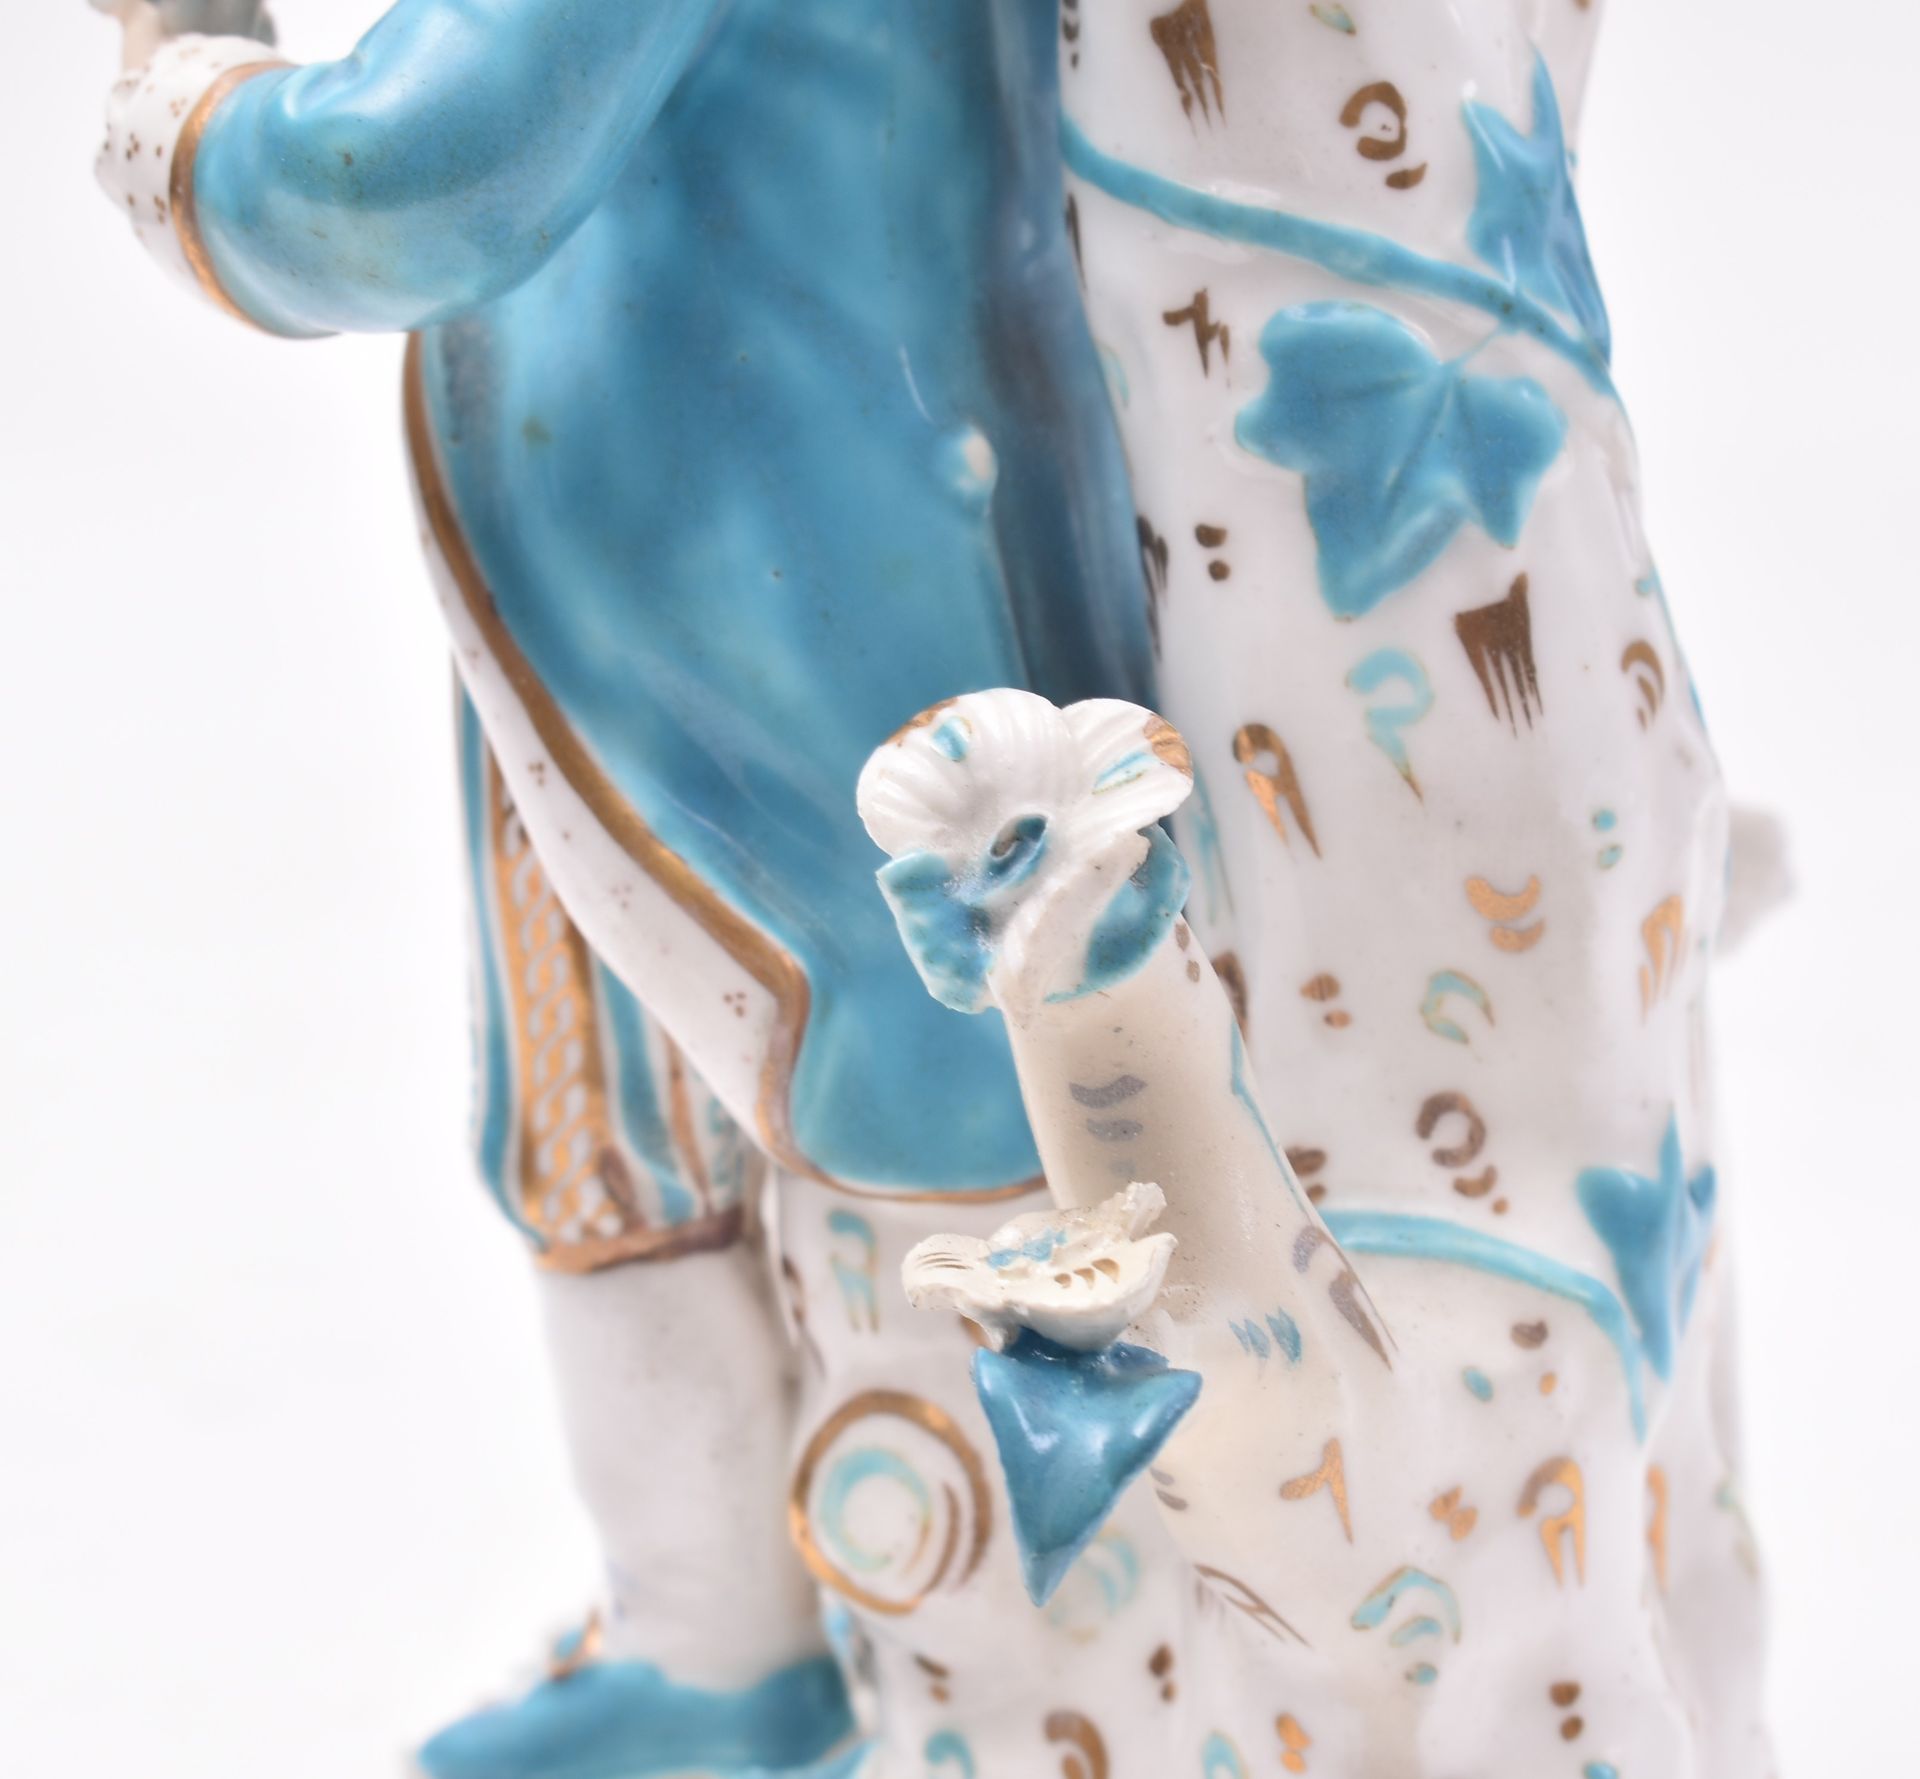 EARLY 19TH CENTURY CONTINENTAL GERMAN PORCELAIN FIGURE - Image 4 of 7